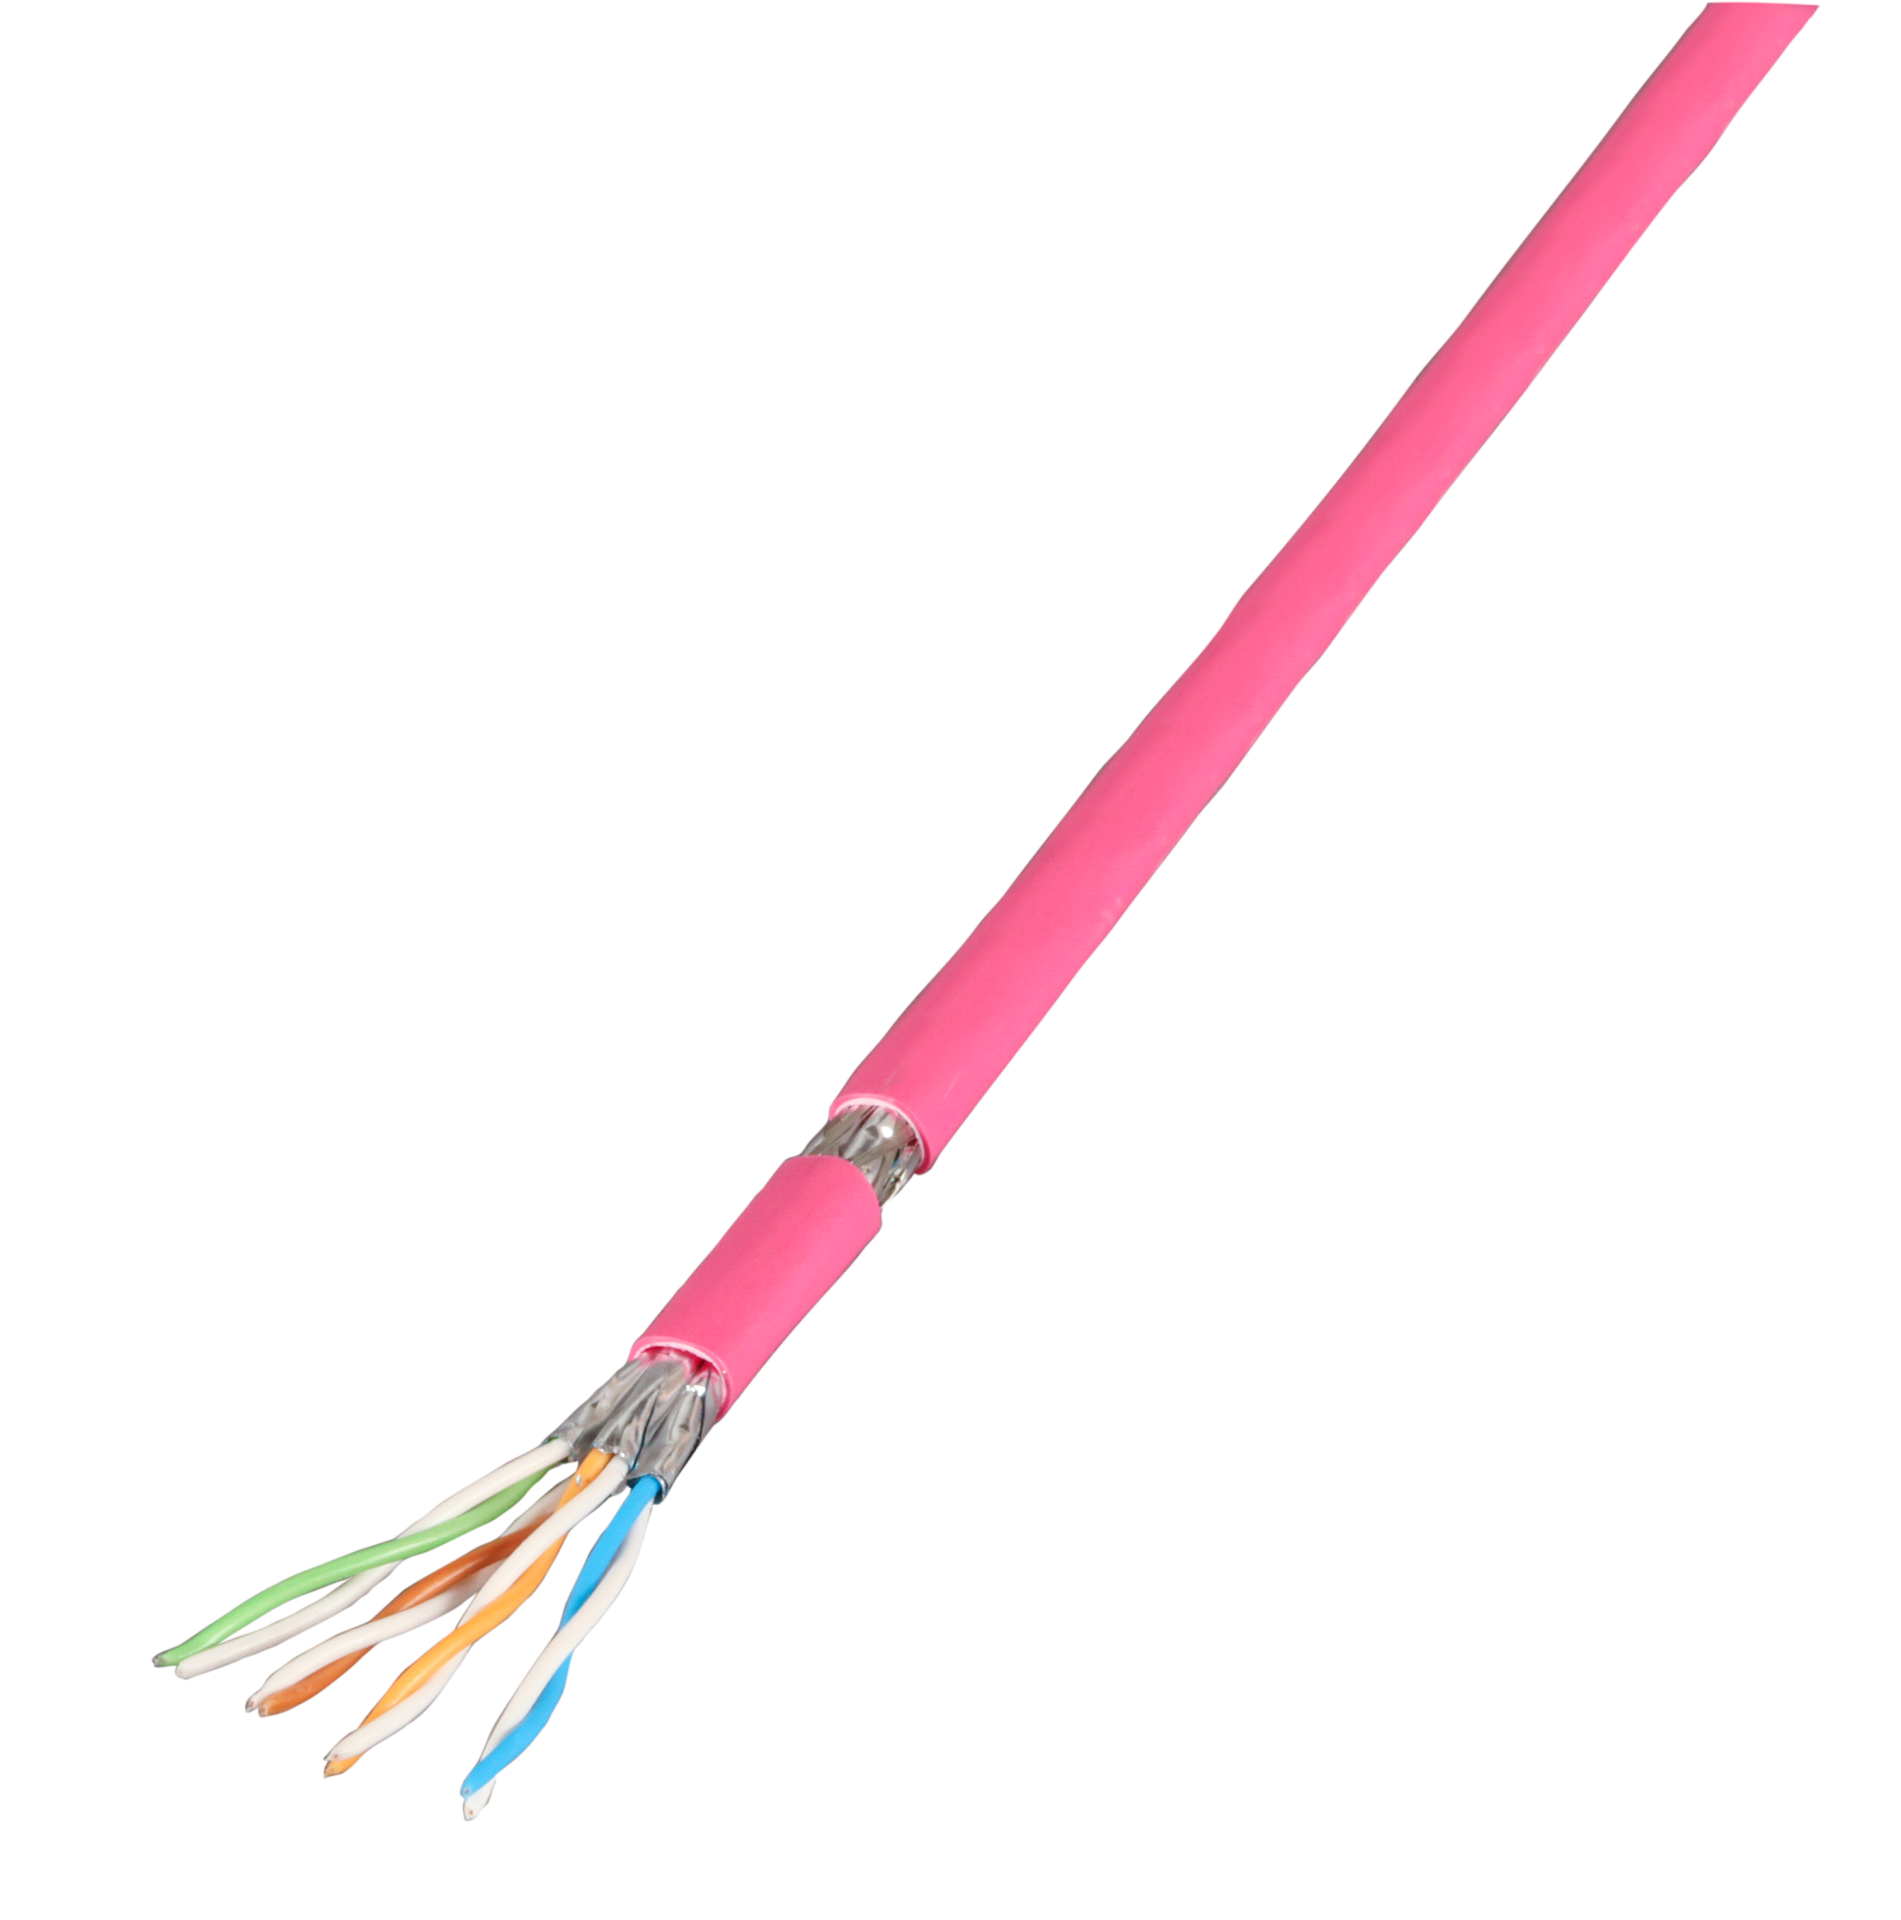 Patch cable Cat.7 PiMF UC900MHz SS26 4P FRNC-B, erica-violet